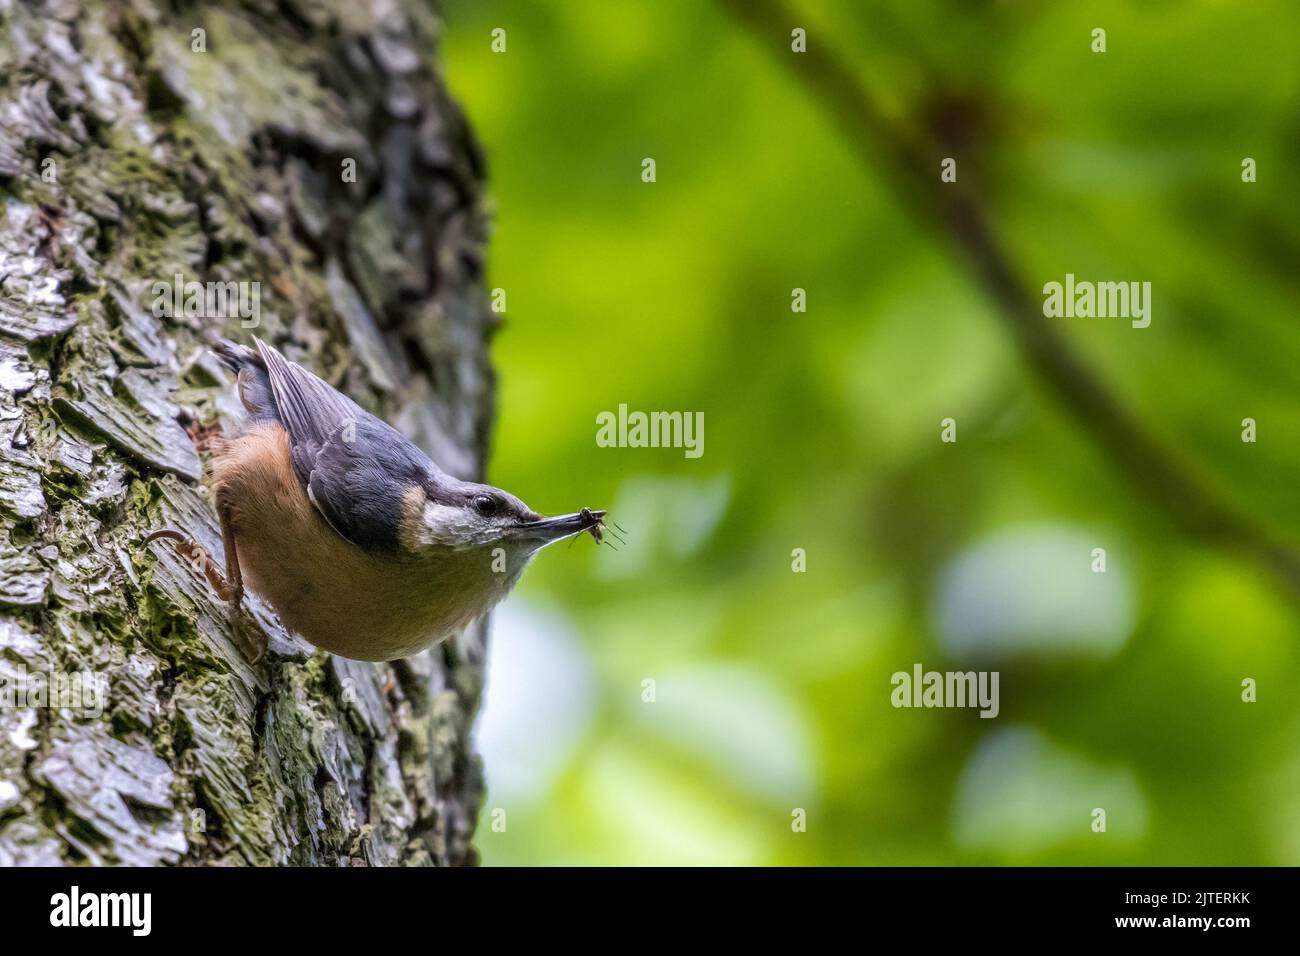 Nuthatch (sitta europaea) with an insect in its beak, in woodland, UK wildlife Stock Photo